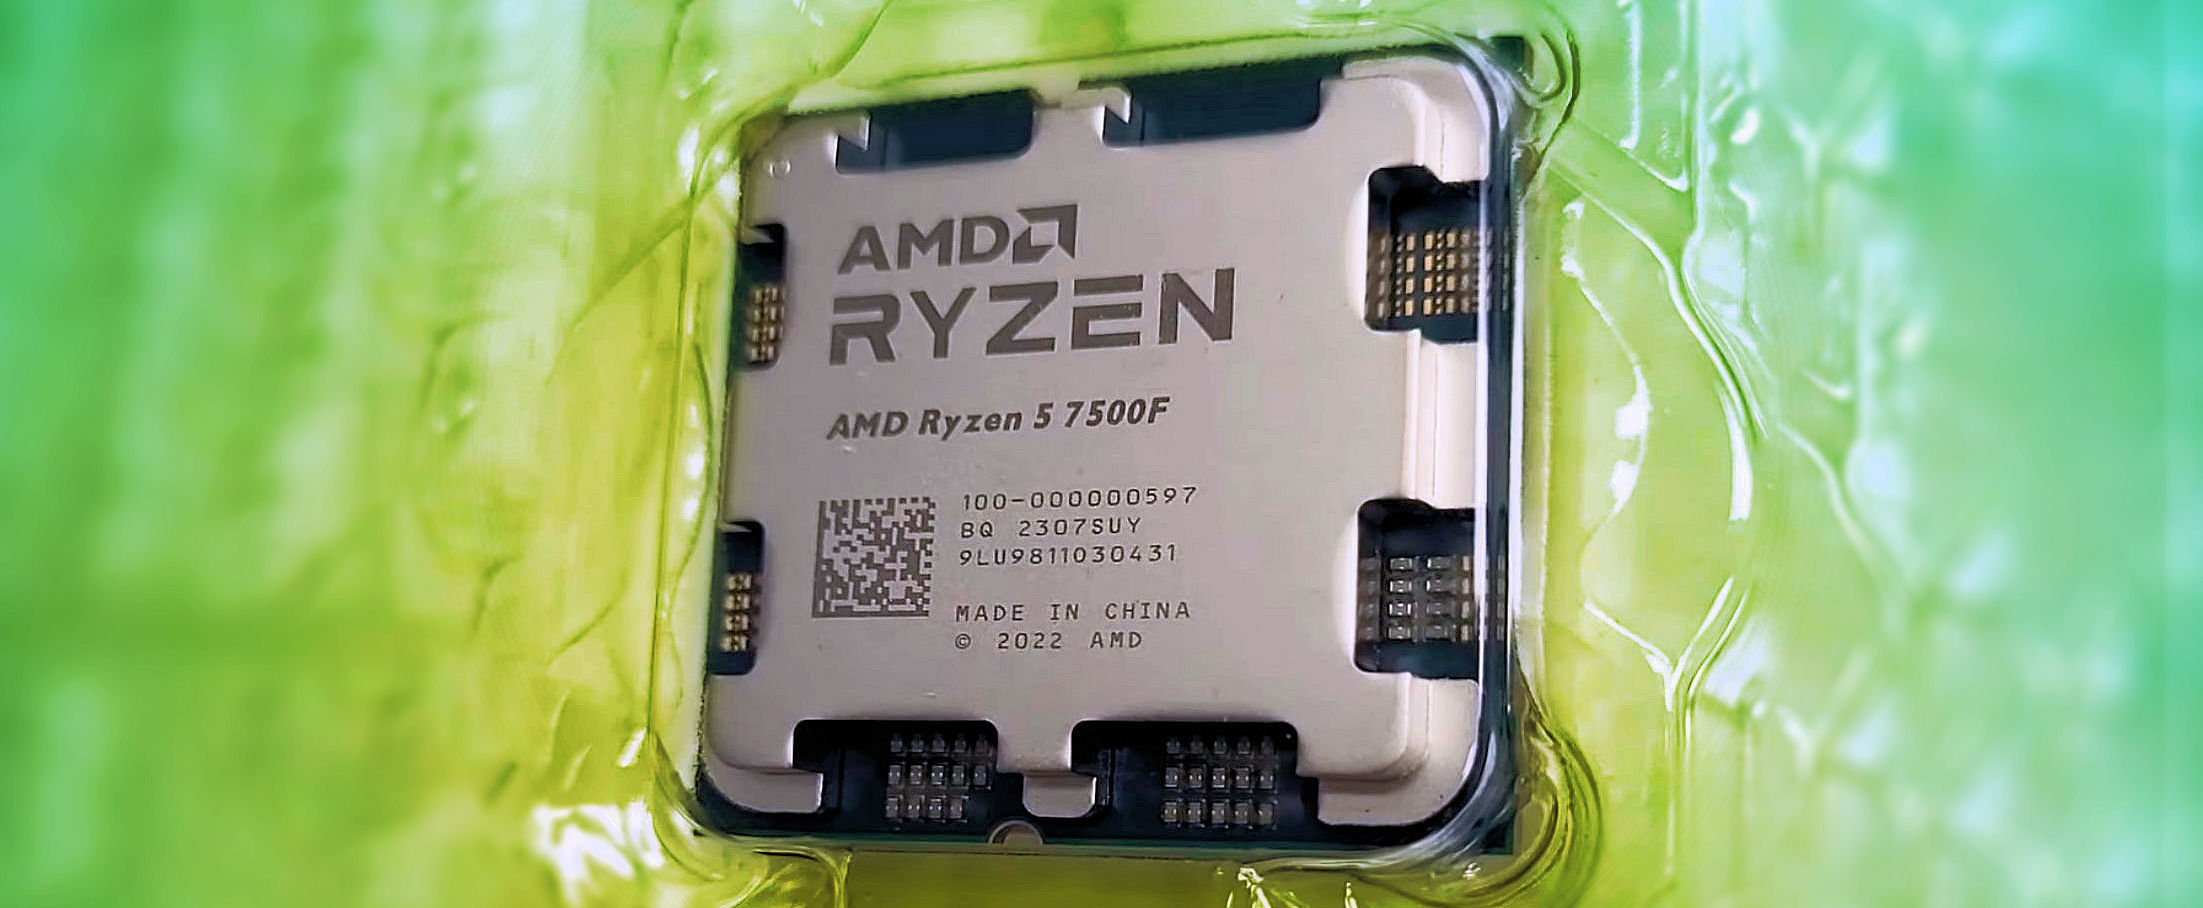 AMD 6-core Ryzen 5 7500F trades places with 7600X in first Geekbench test 